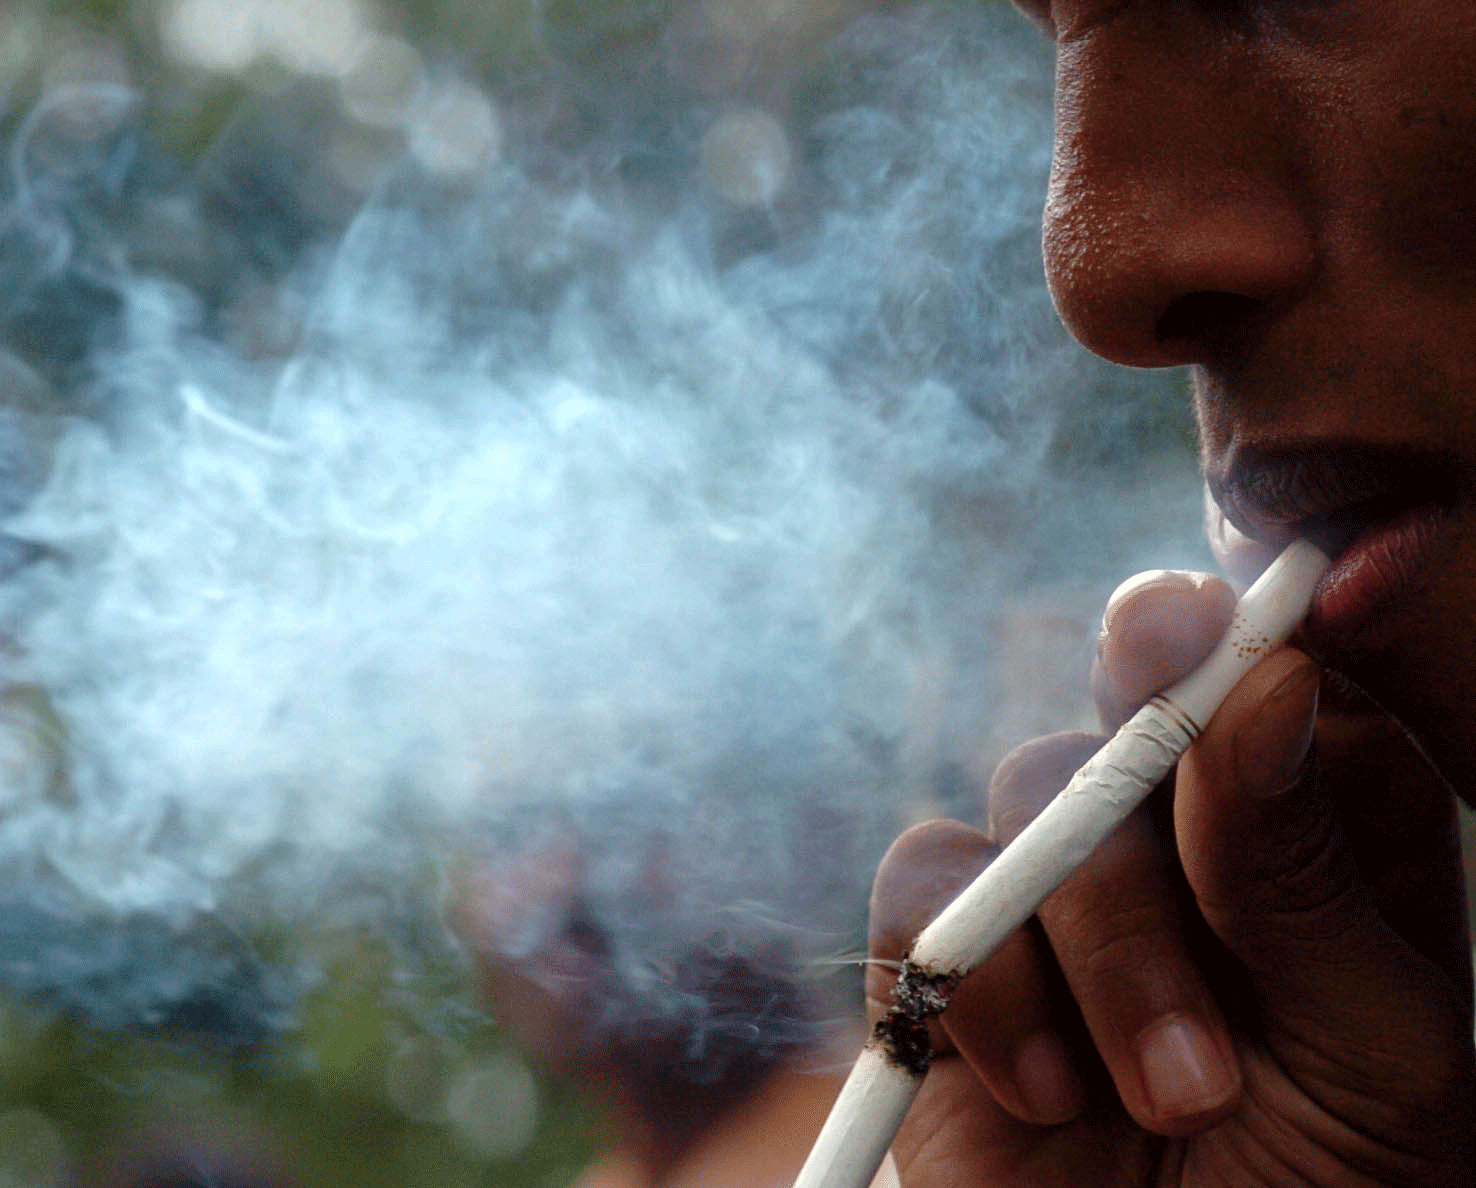 The Union Health Ministry has accepted the recommendations of an expert panel, appointed by former health minister Harsh Vardhan, that has proposed banning the sale of loose or single sticks of cigarettes as an anti-tobacco measure to improve public health. DH file photo